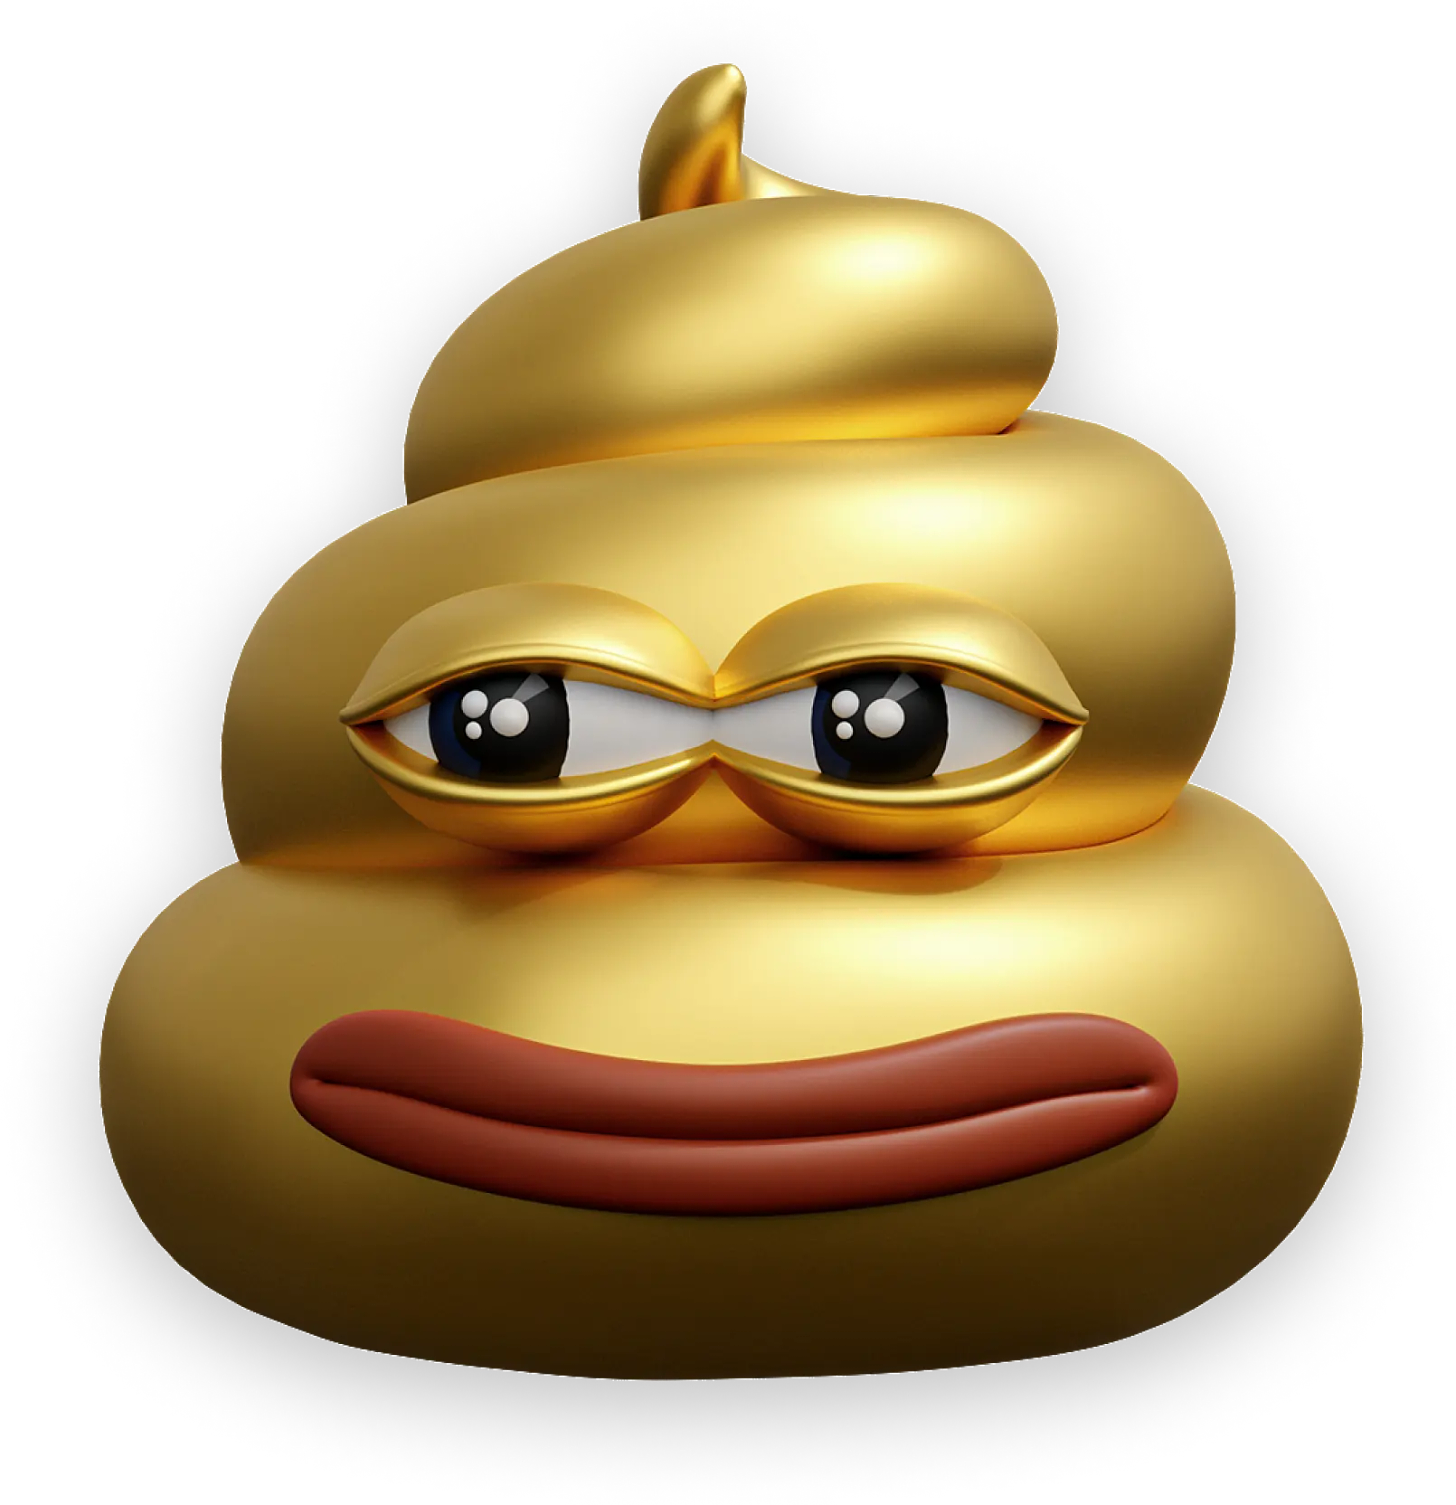 A shiny golden pile of poo, with a smile and eyes resembling those of Pepe the Frog